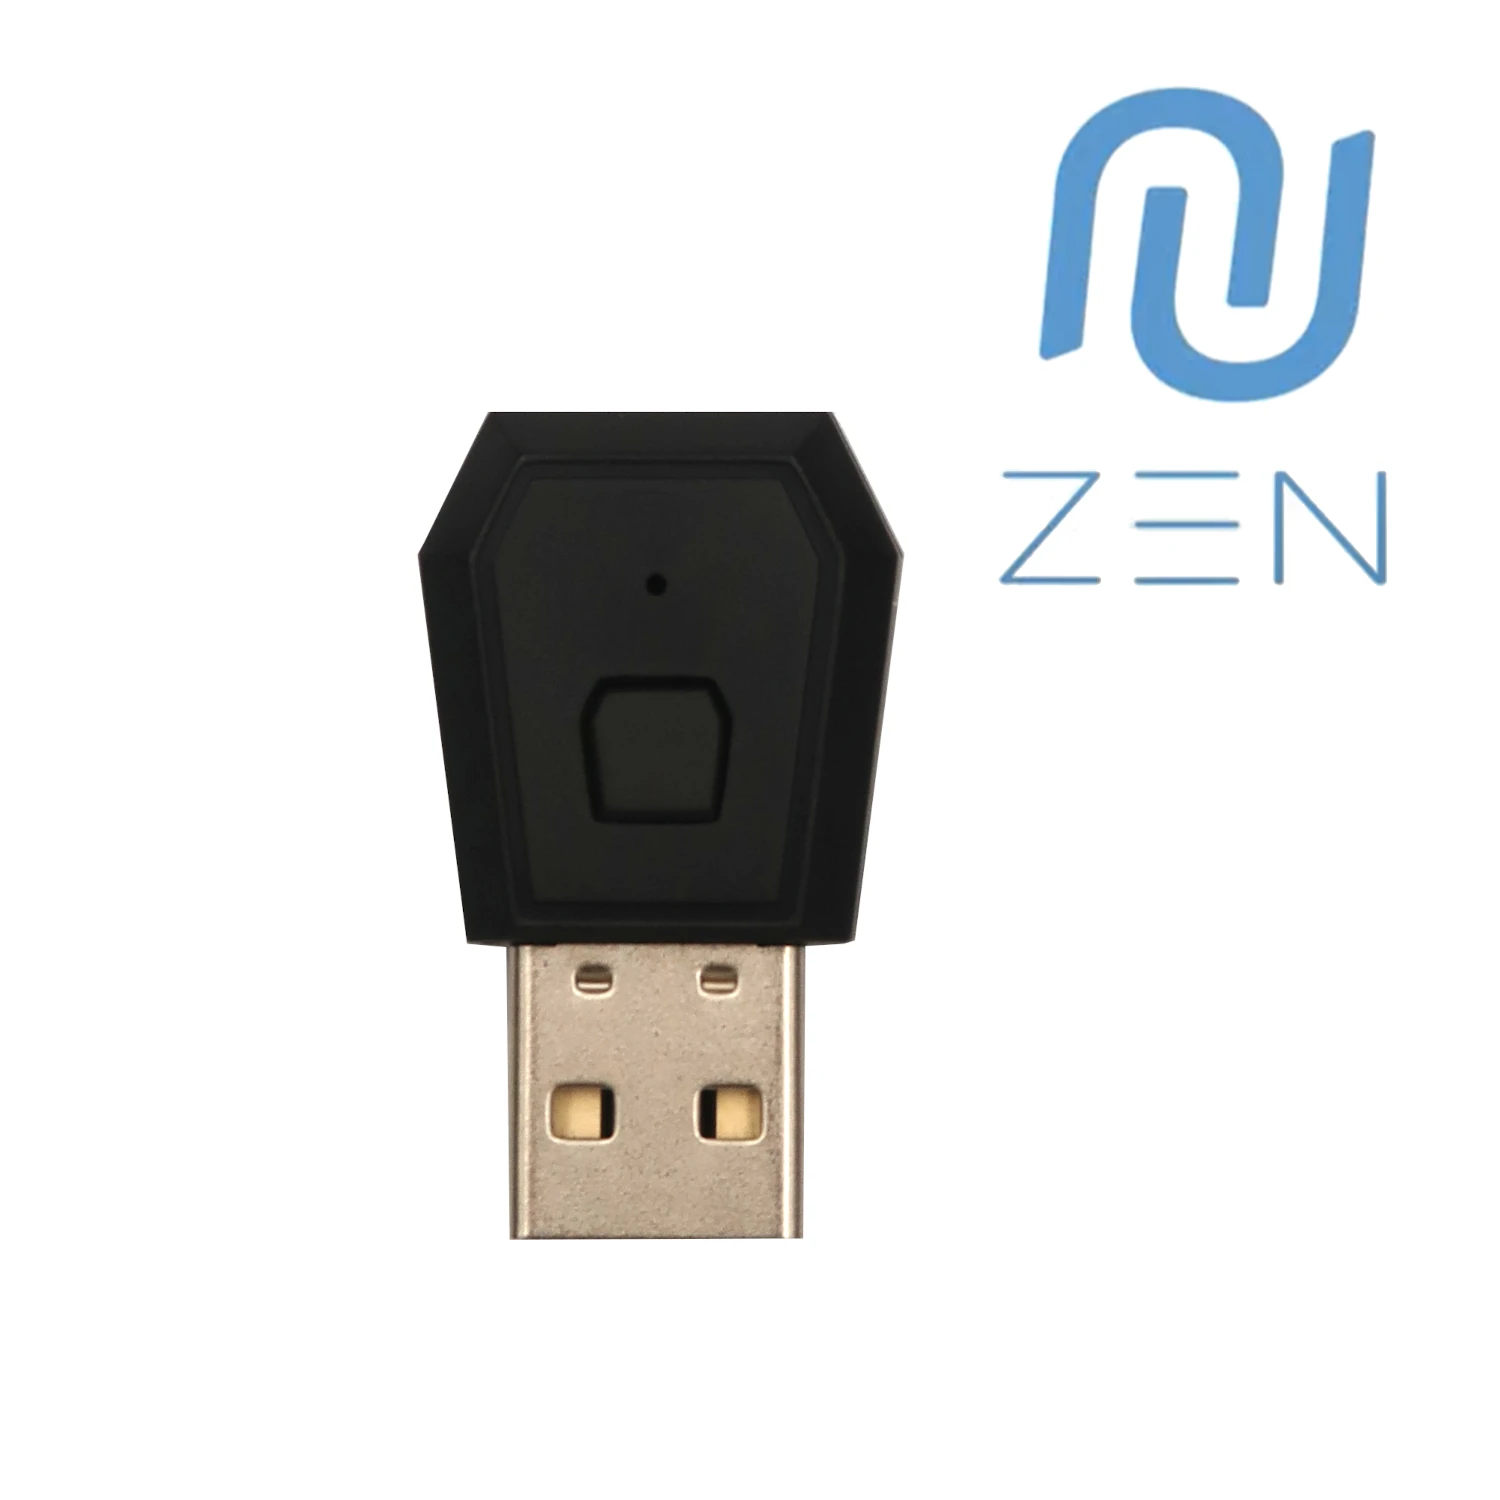 for PS5 USB Dongle for Cronus Zen Cronusmax2 for PS5/Xbox Series X/Xbox  Series S/PS4/Xbox One/Xbox 360 Game Controllers for Sony